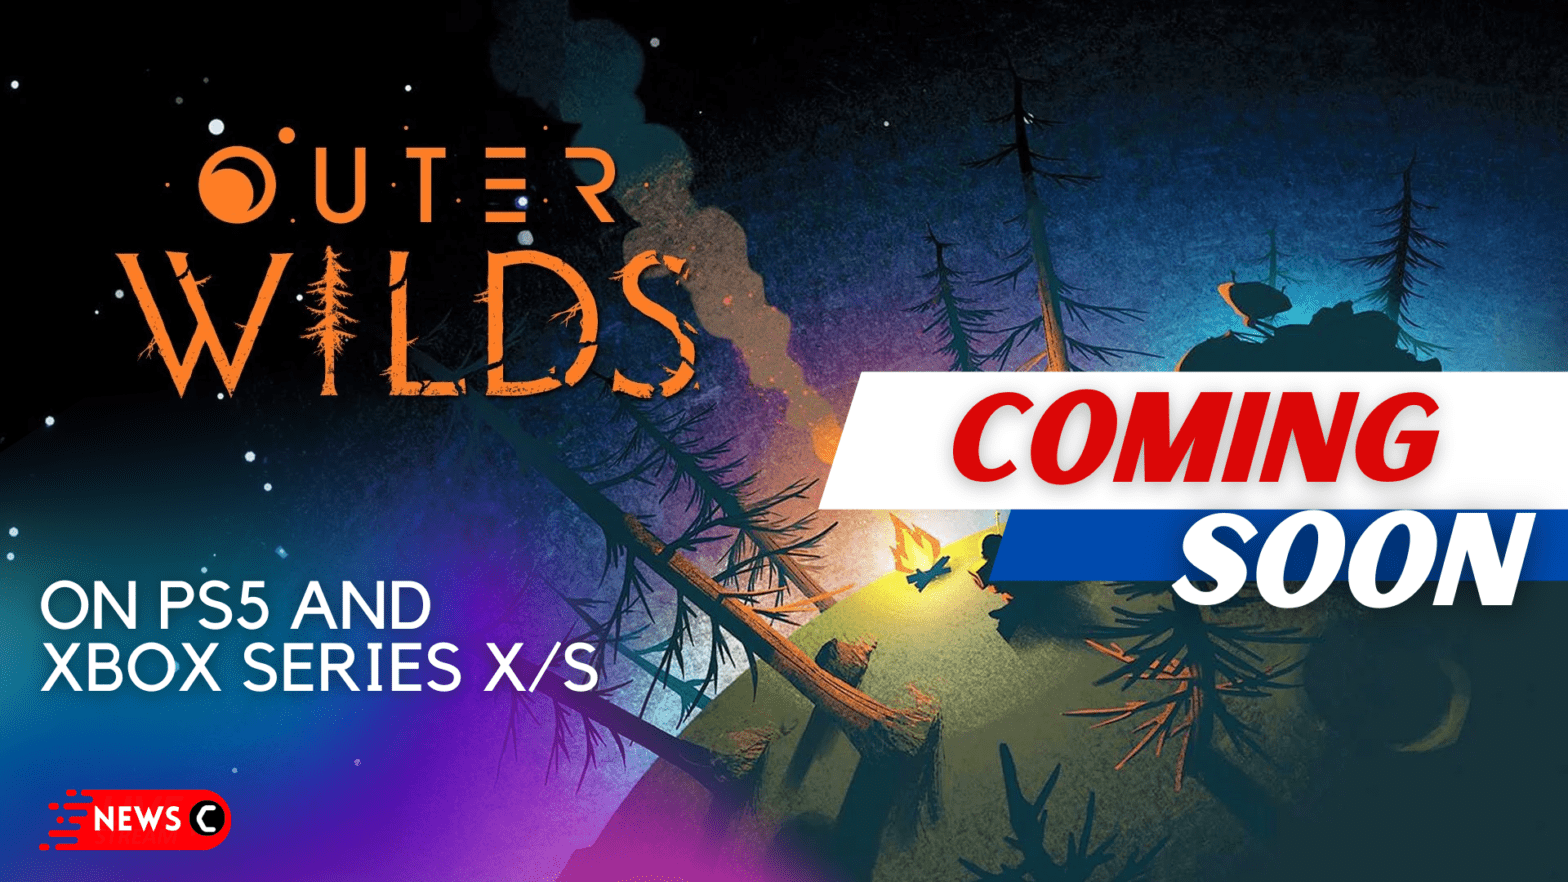 Outer Wilds Is Coming To PS5 and Xbox Series X/S – But When?